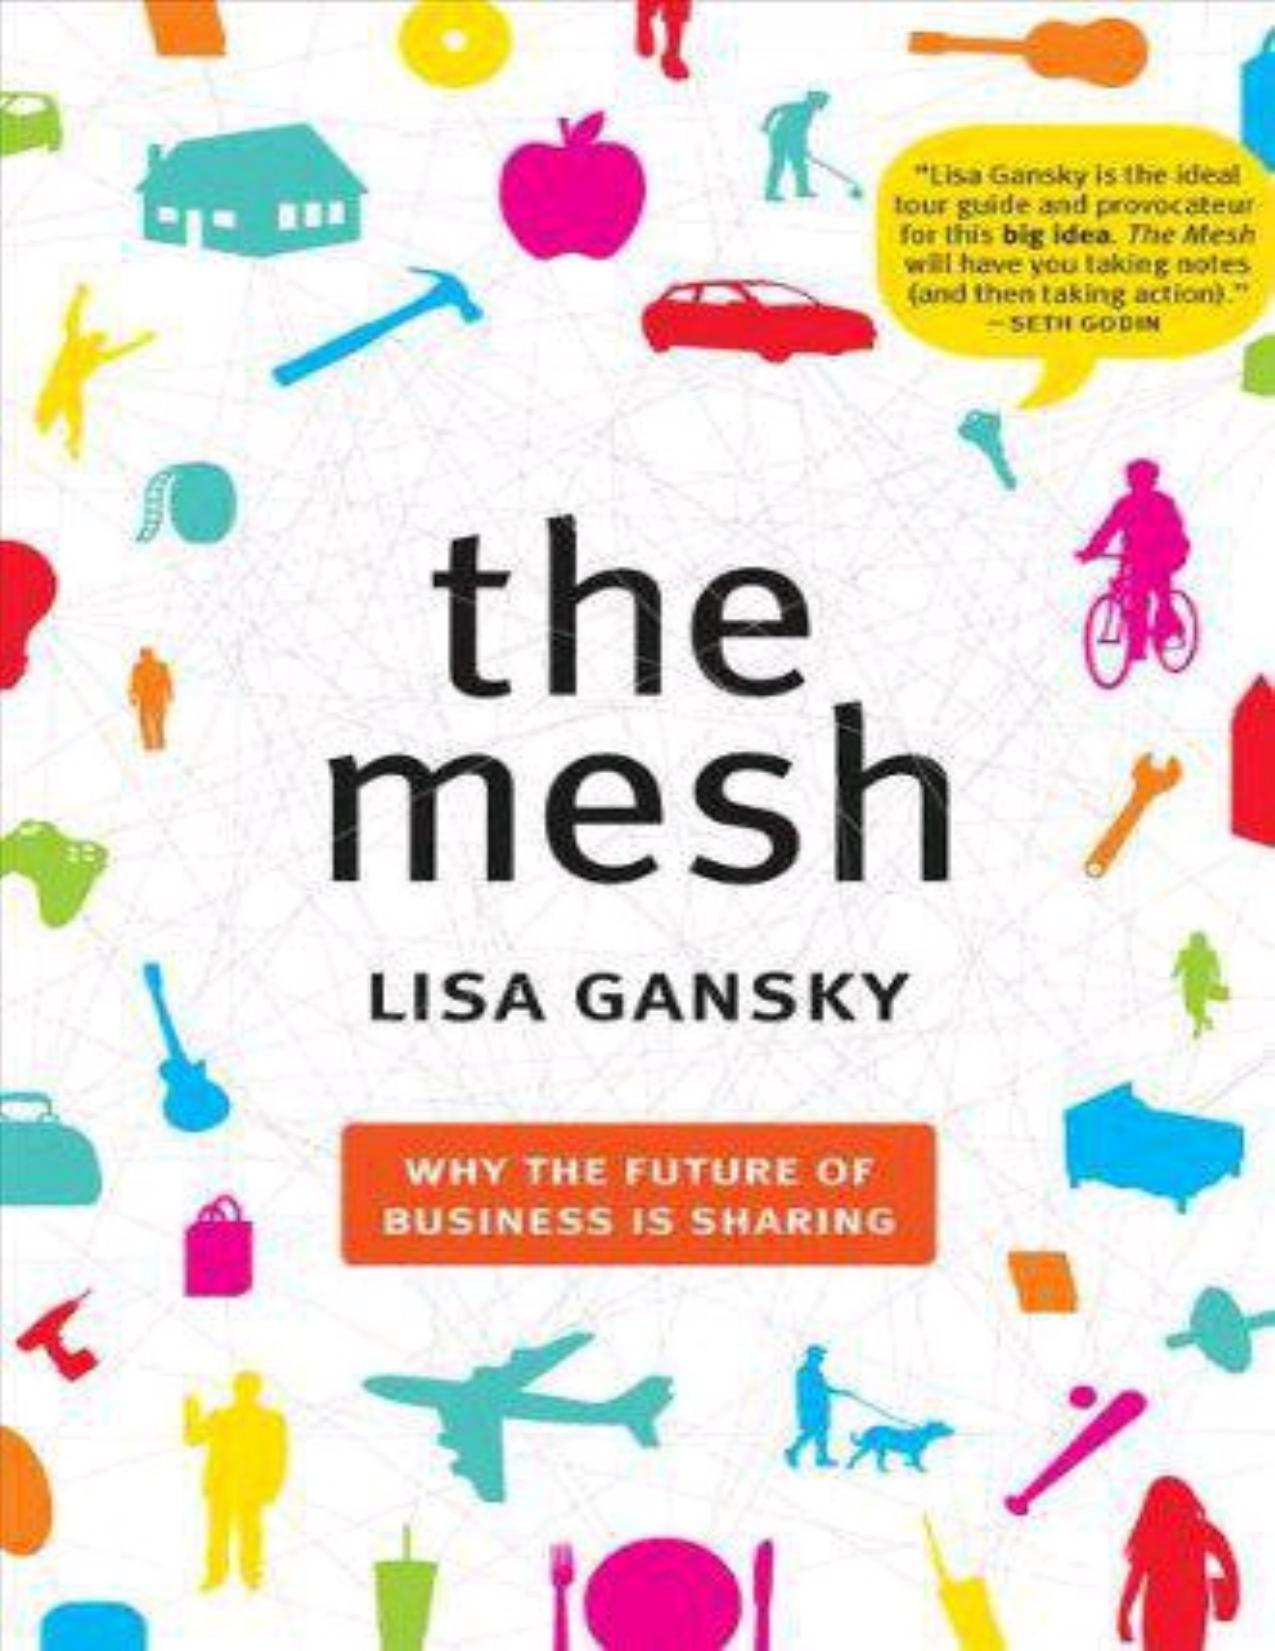 The Mesh: Why the Future of Business Is Sharing by Lisa Gansky